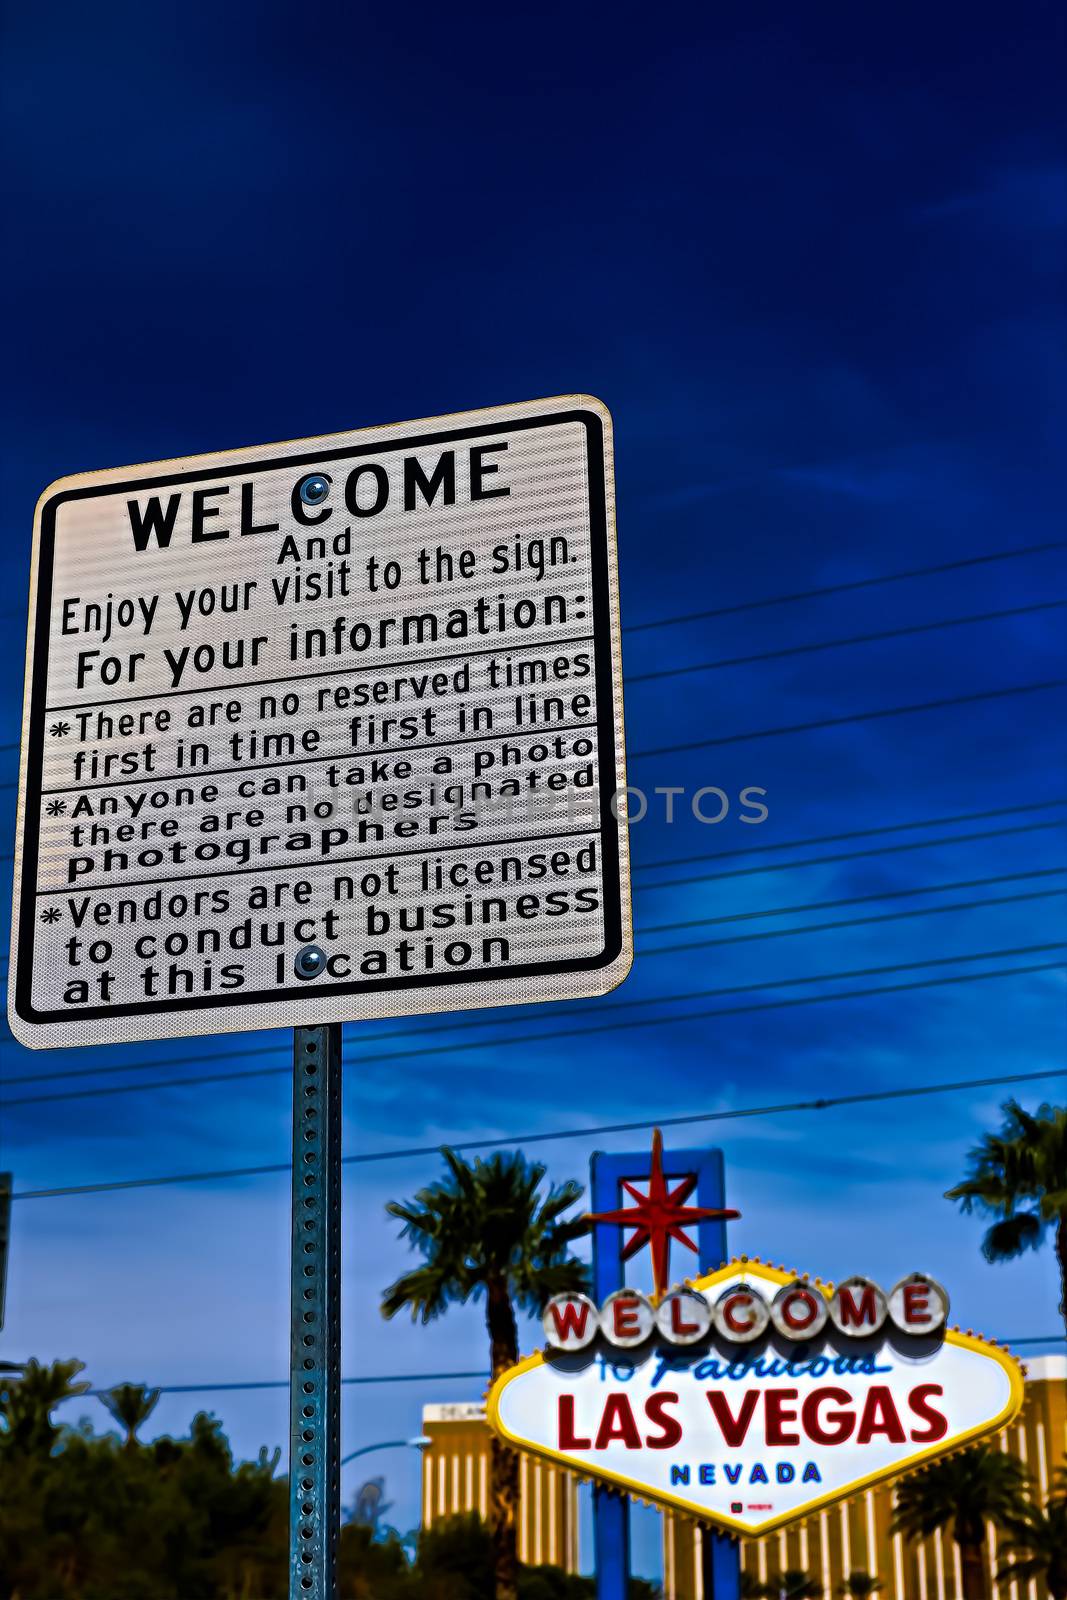 he Welcome to Fabulous Las Vegas sign on bright sunny day in Las Vegas.Welcome to Never Sleep city Las Vegas, Nevada Sign with the heart of Las Vegas scene in the background. by USA-TARO